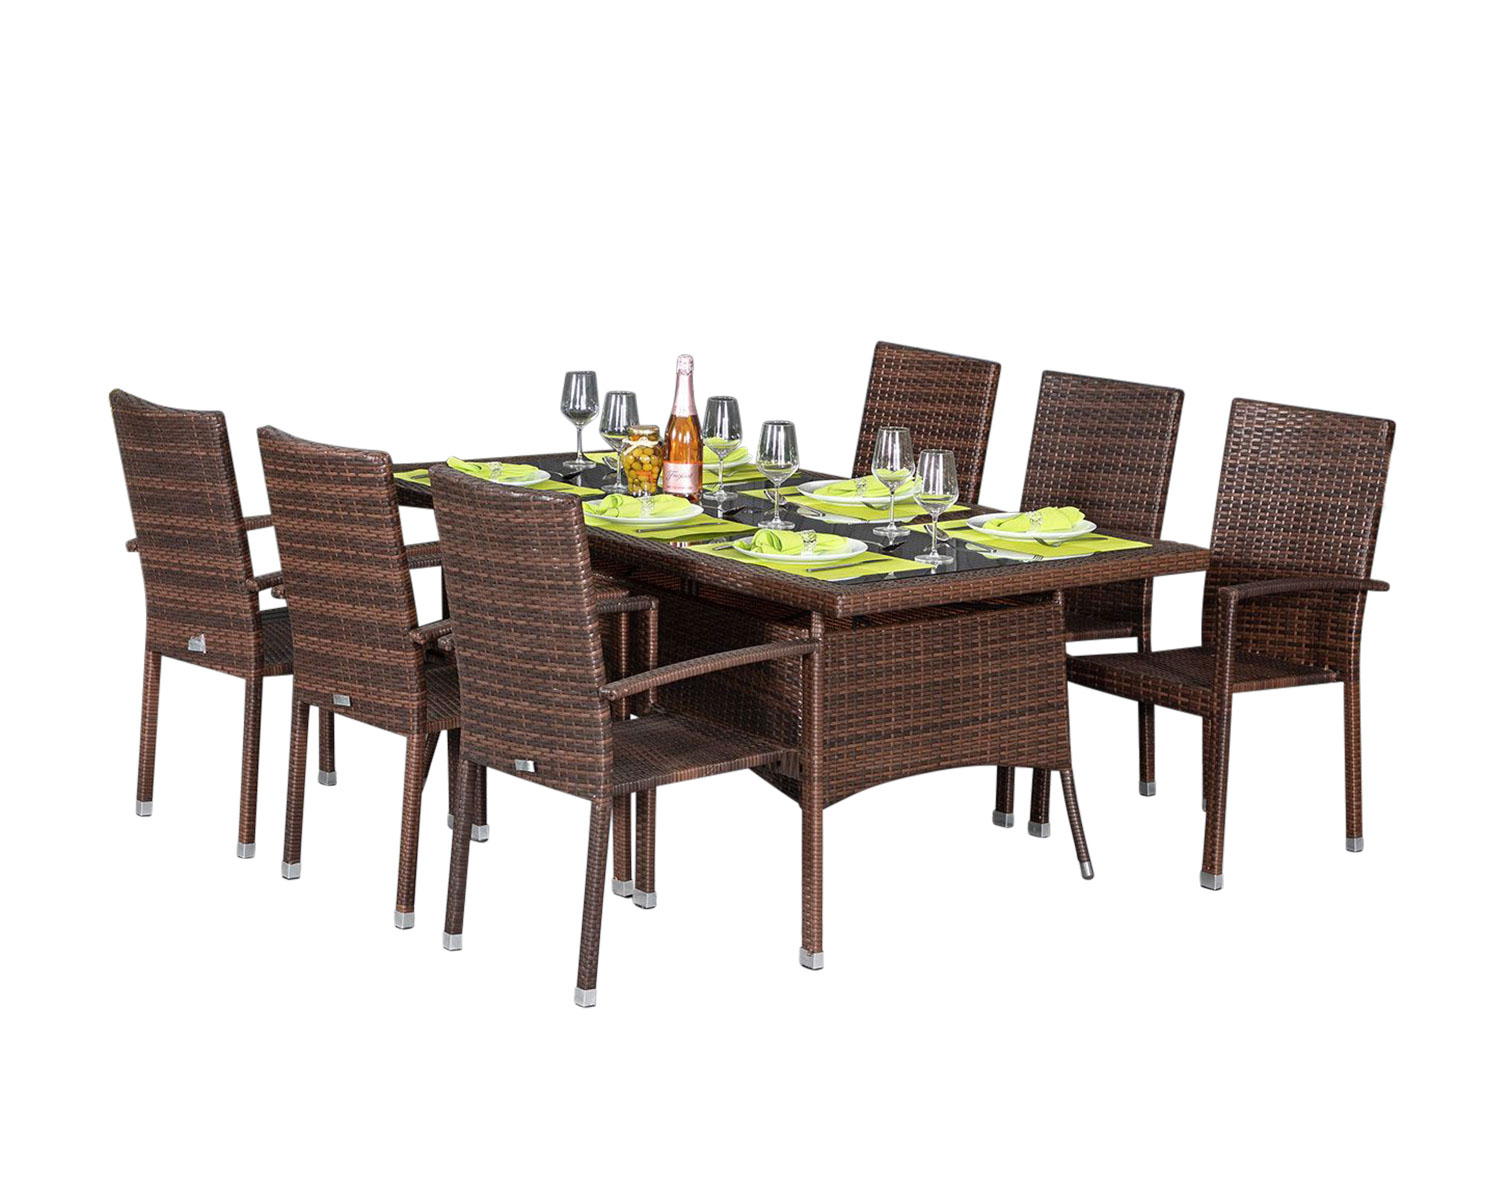 6 Seat Rattan Garden Dining Set With Large Rectangular Dining Table In Brown Rio Rattan Direct